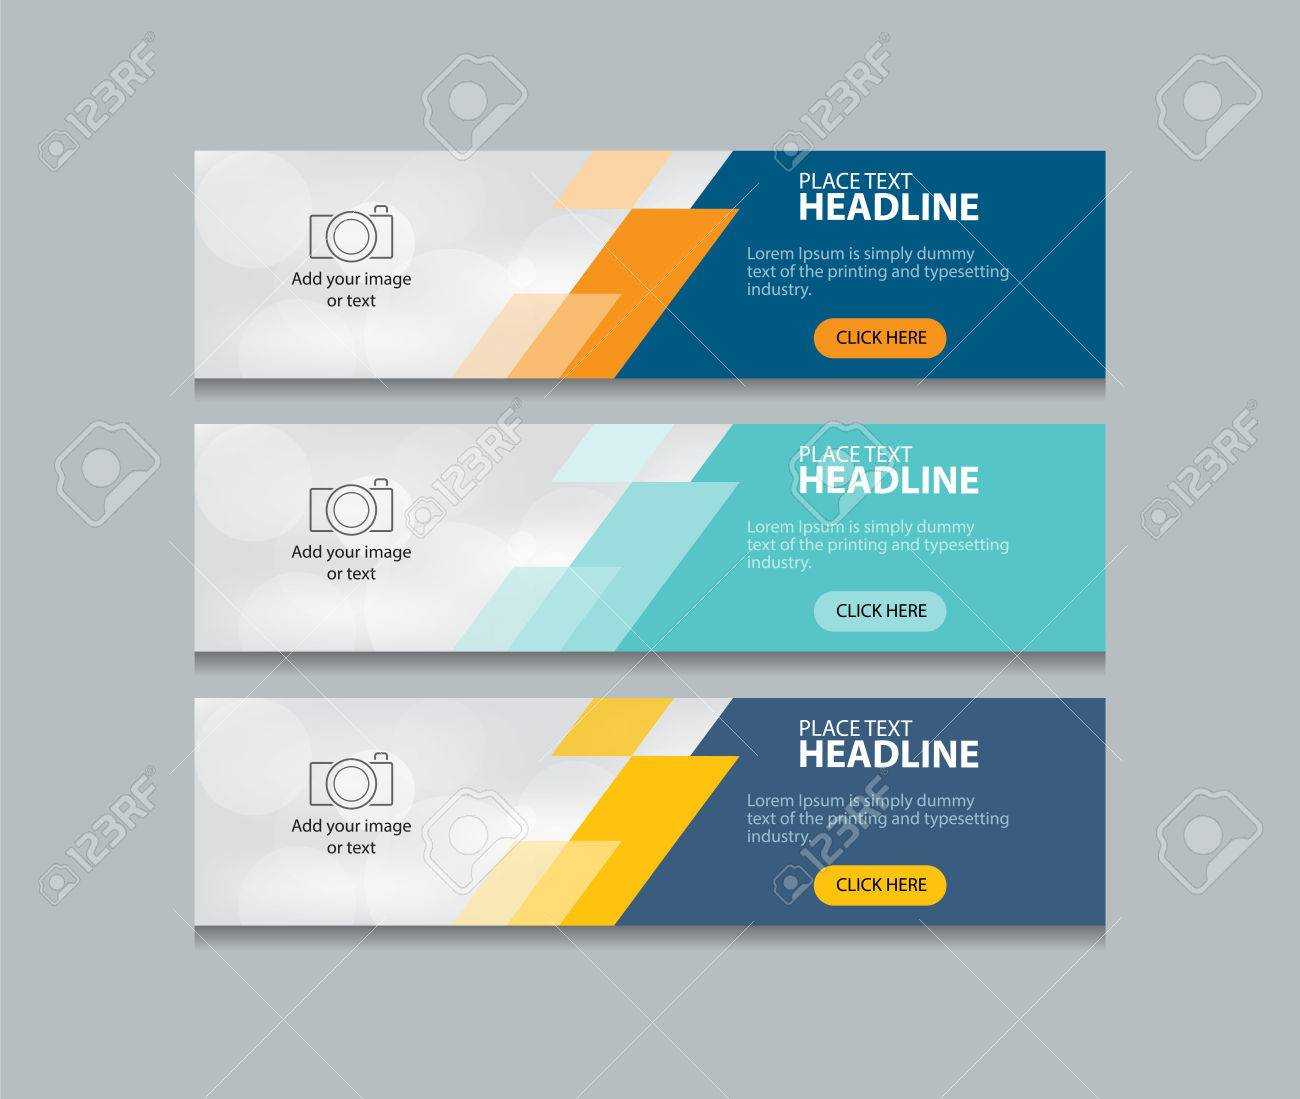 Abstract Web Banner Design Template Background With Regard To Website Banner Design Templates